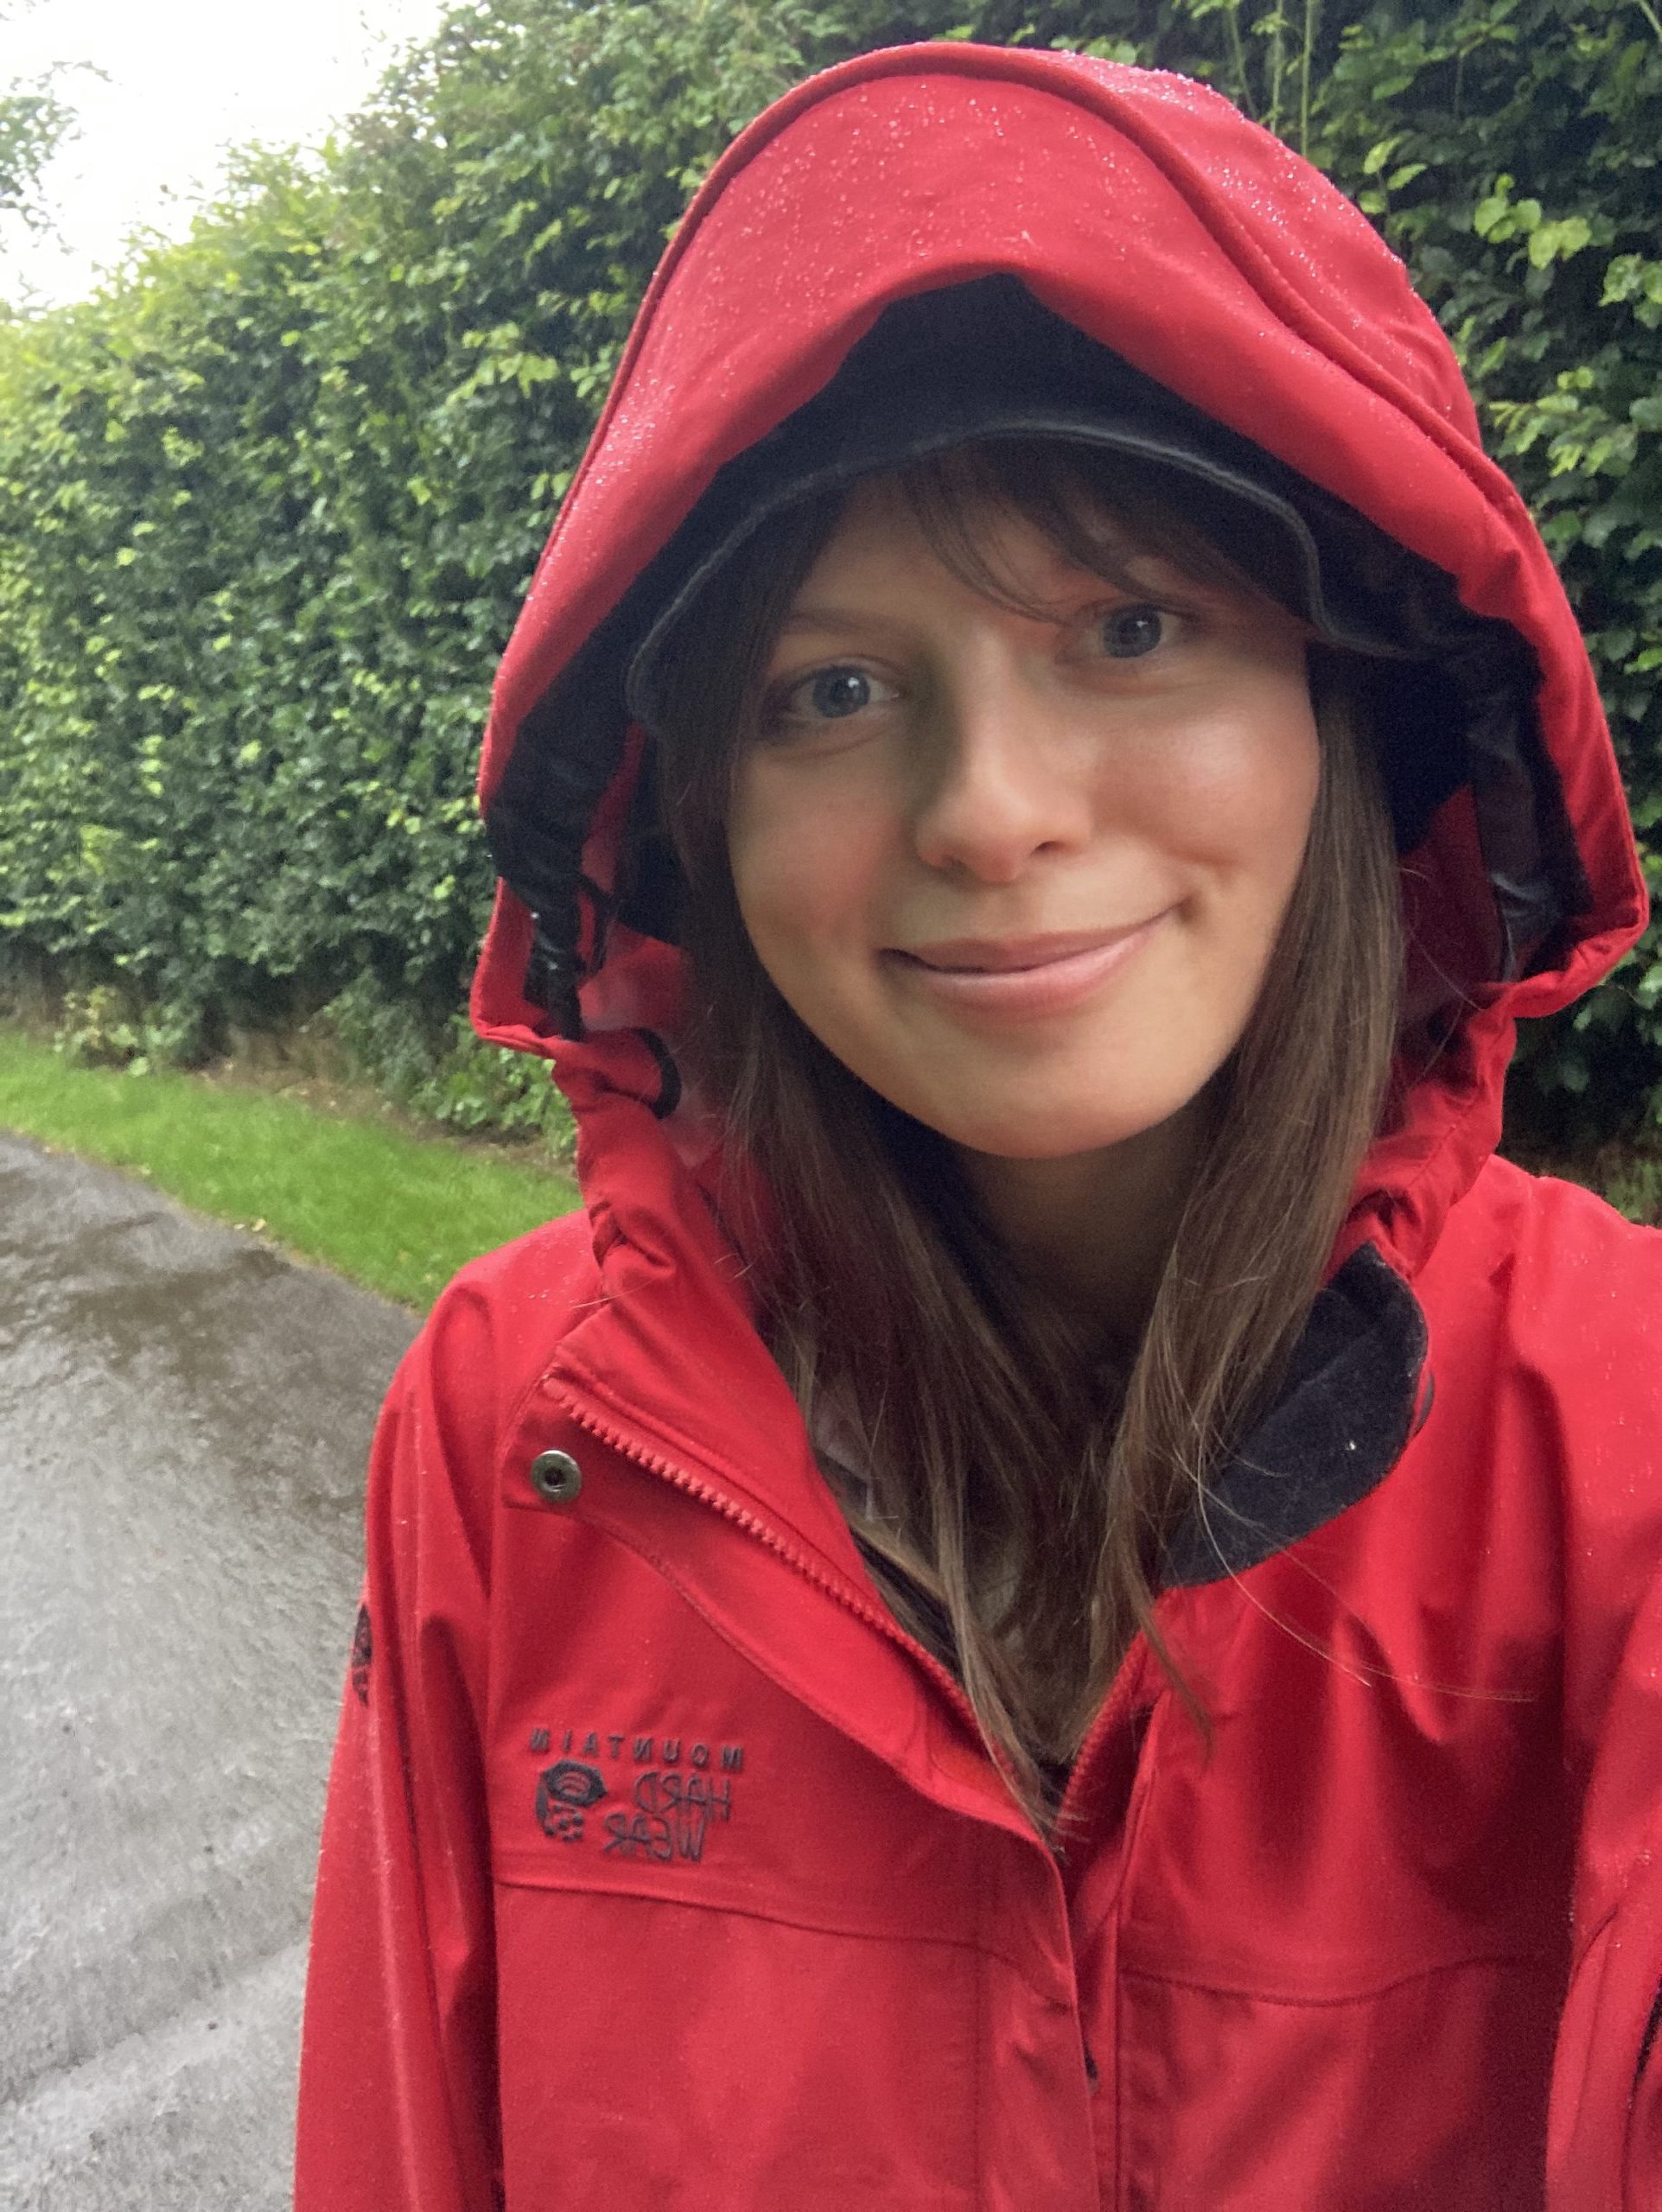 Smiling girl in raincoat with hood up in the rain in the countryside